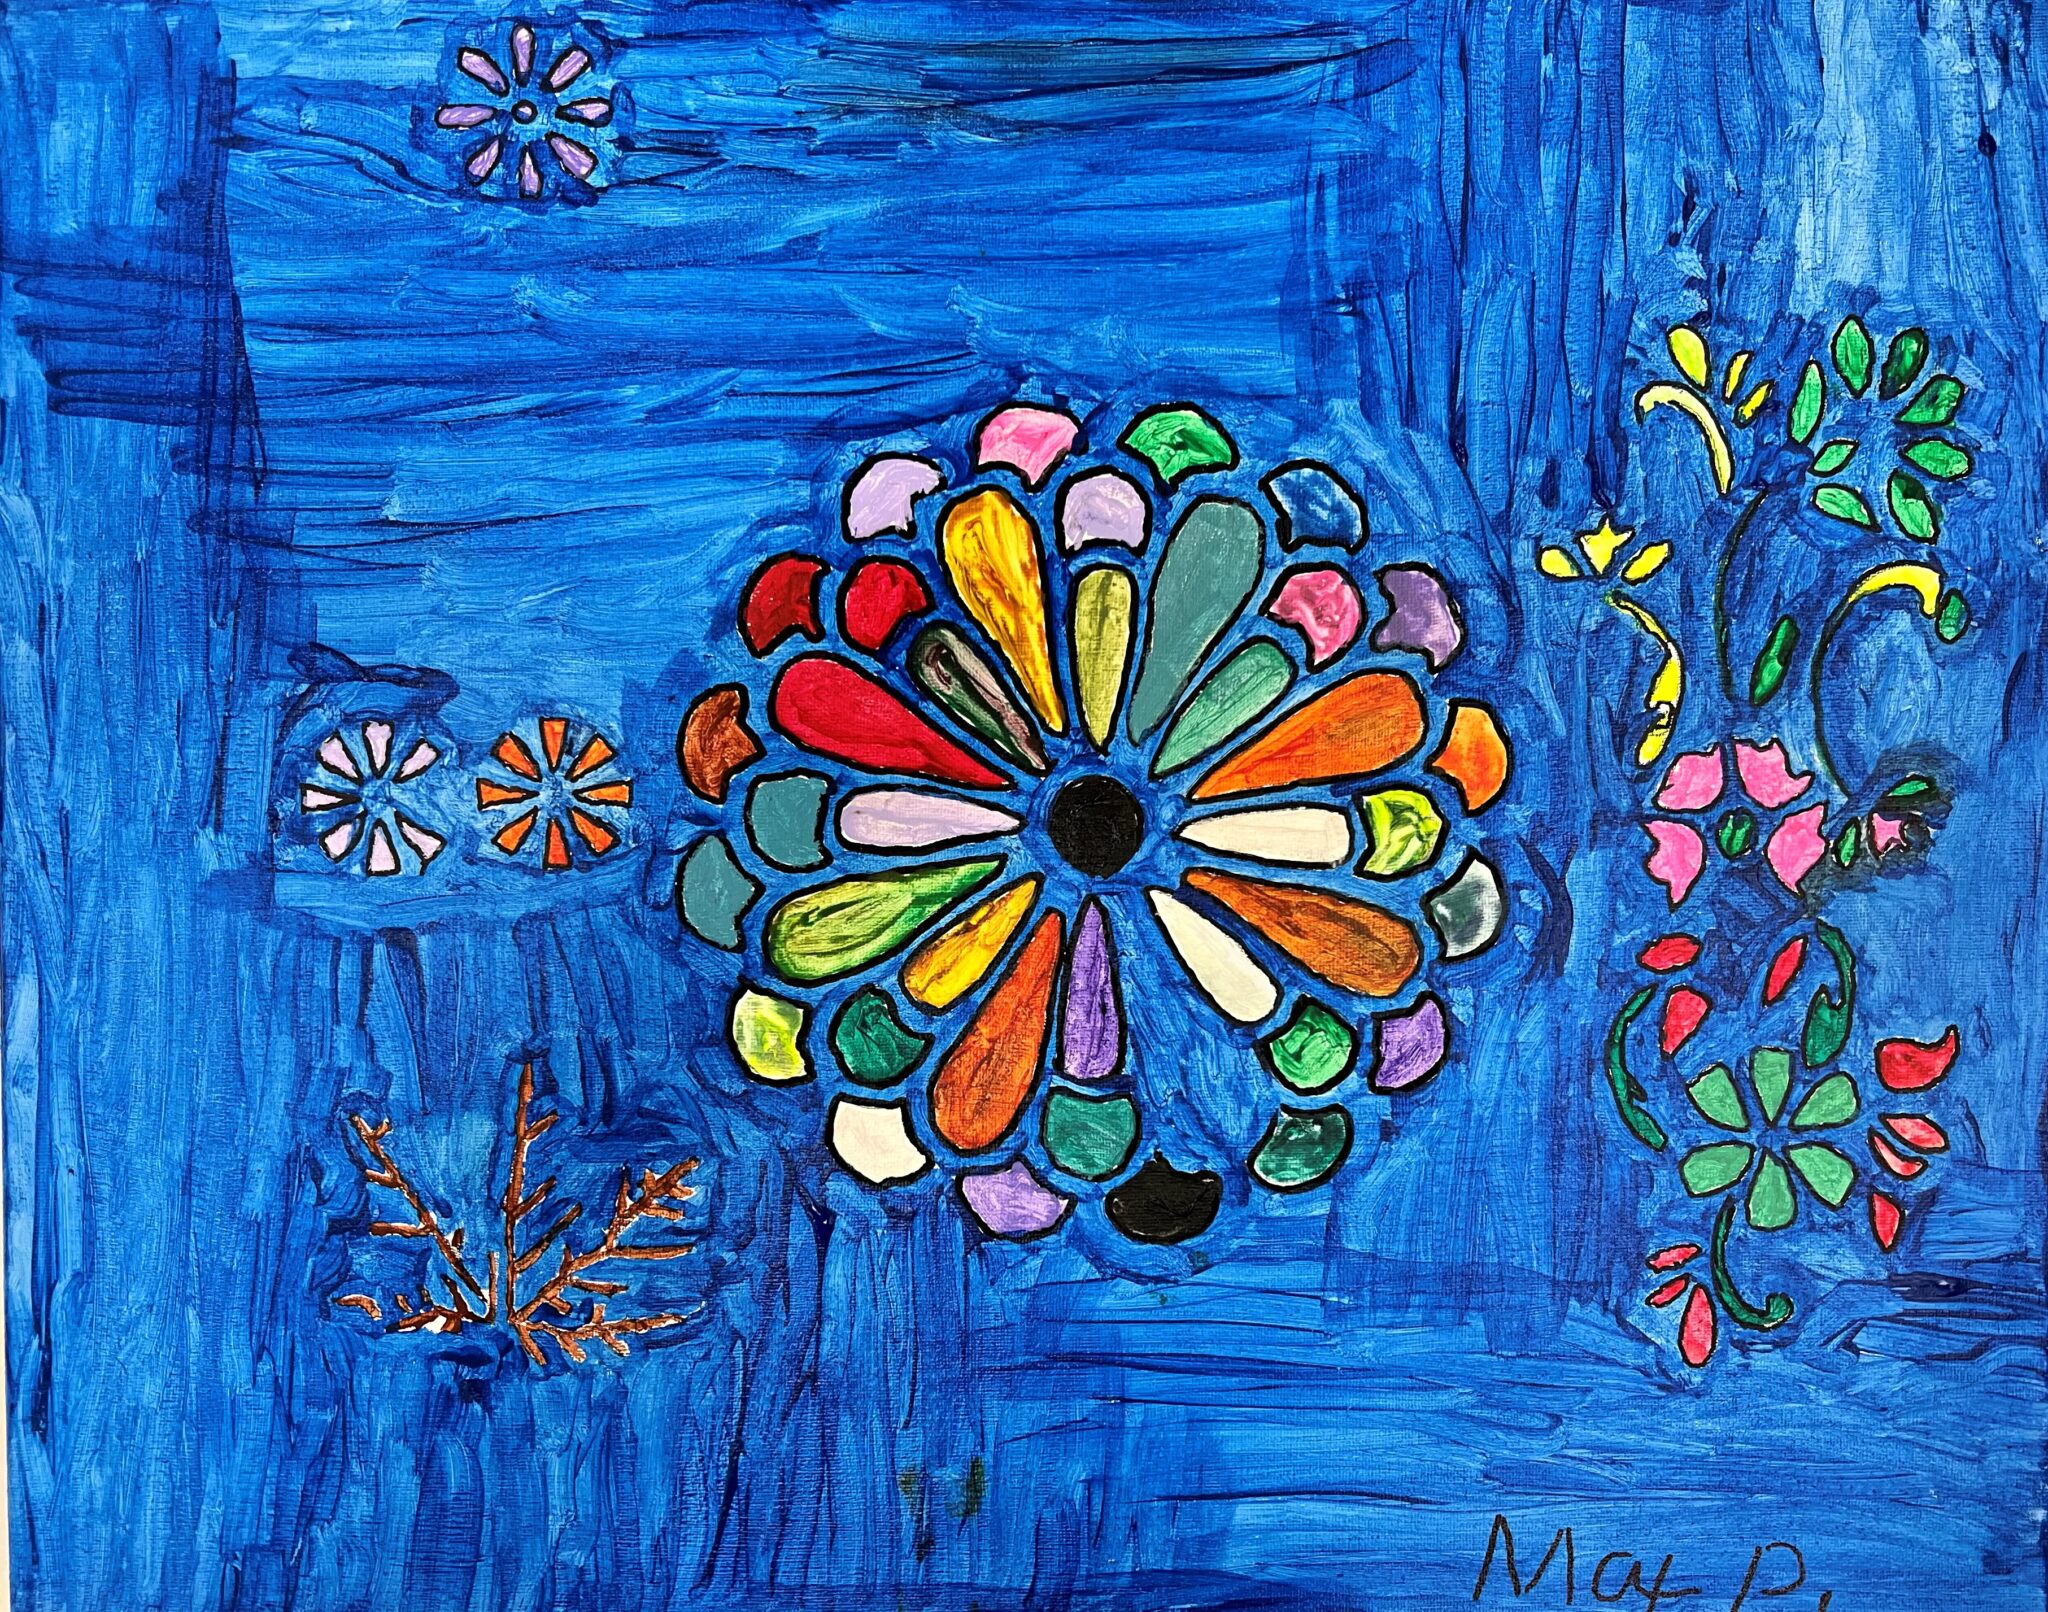 VisAbility Art Lab Holiday Open Studio - Max Poznerzon, Flowers with Different Colors, 2022